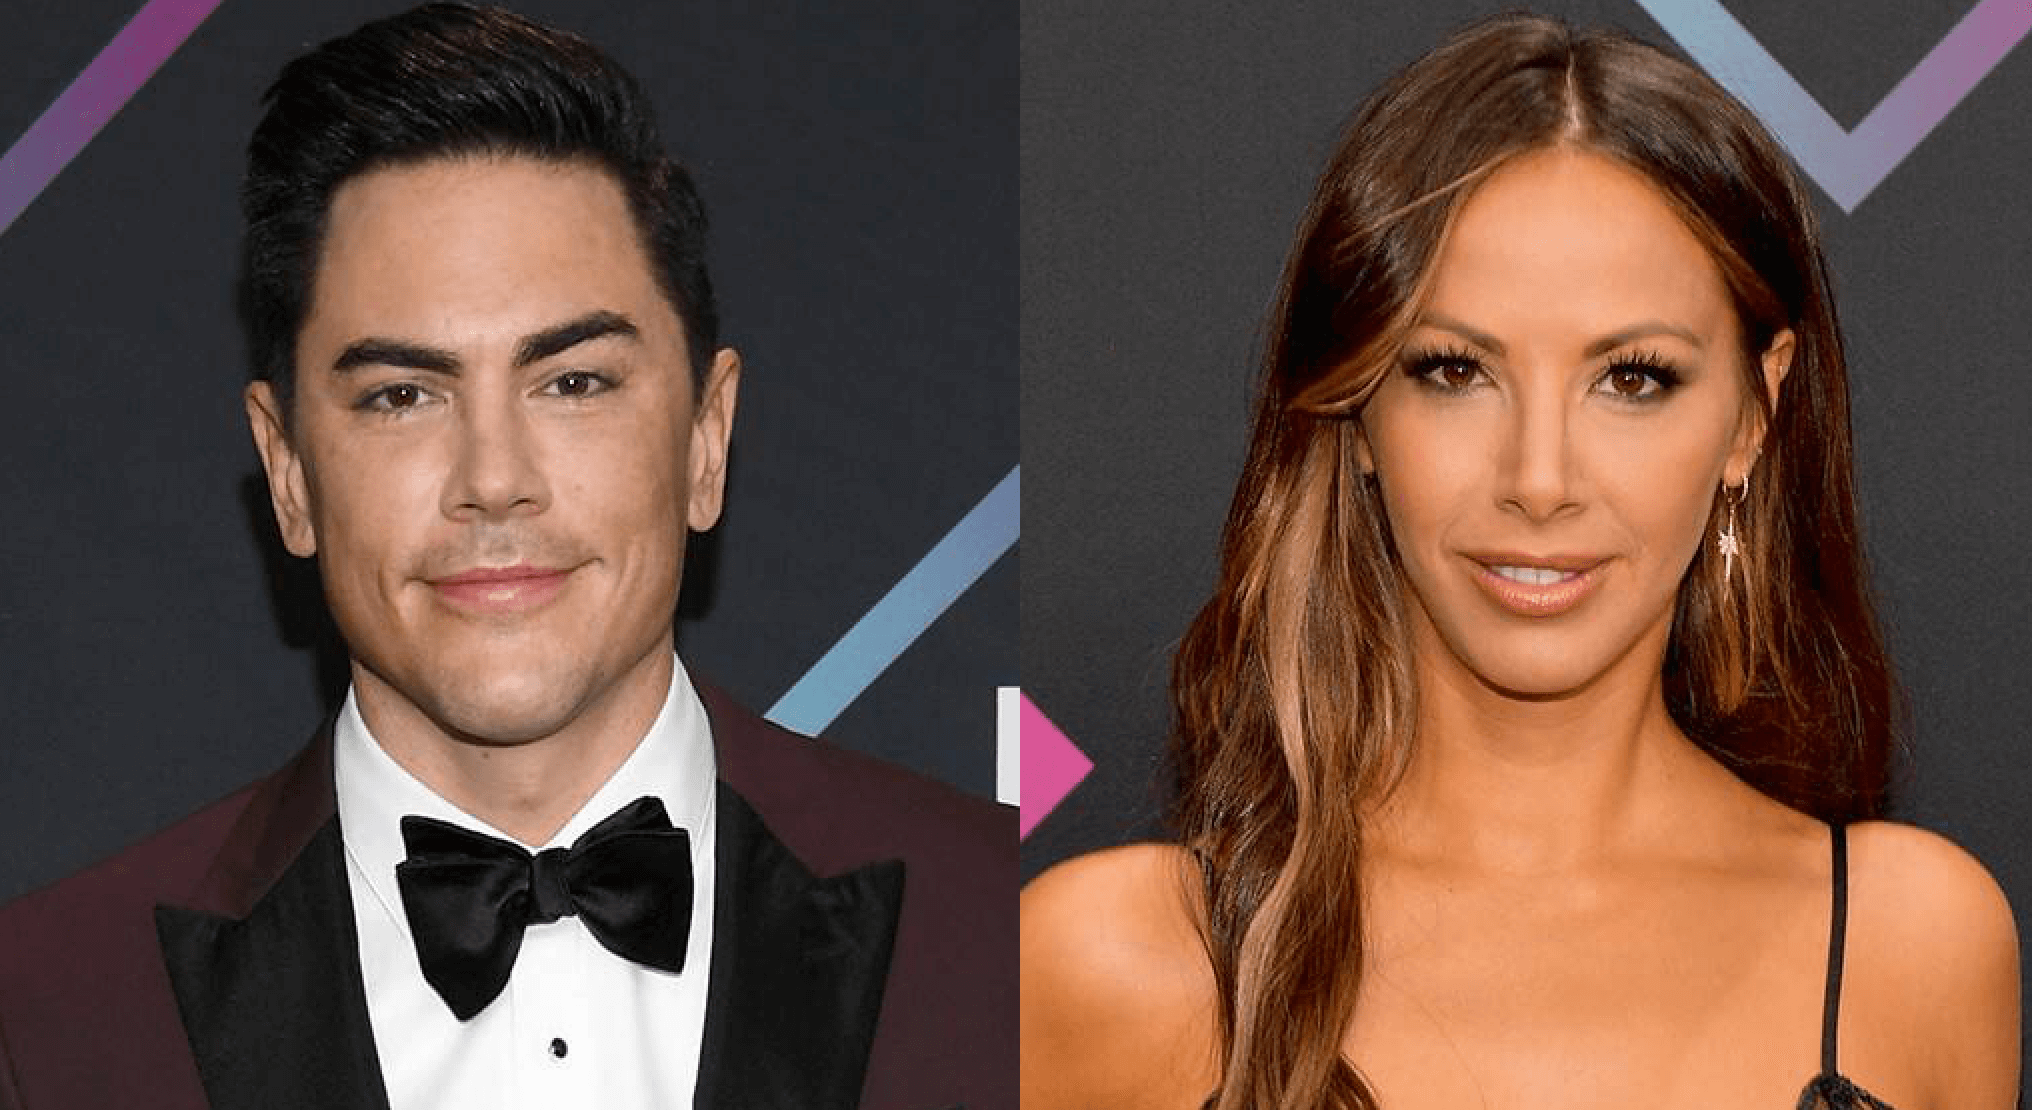 Tom Sandoval BLASTS Kristen Doute For Lying About Their Relationship In Her New Book, ‘She Was Just Trying to Sell Copies’!